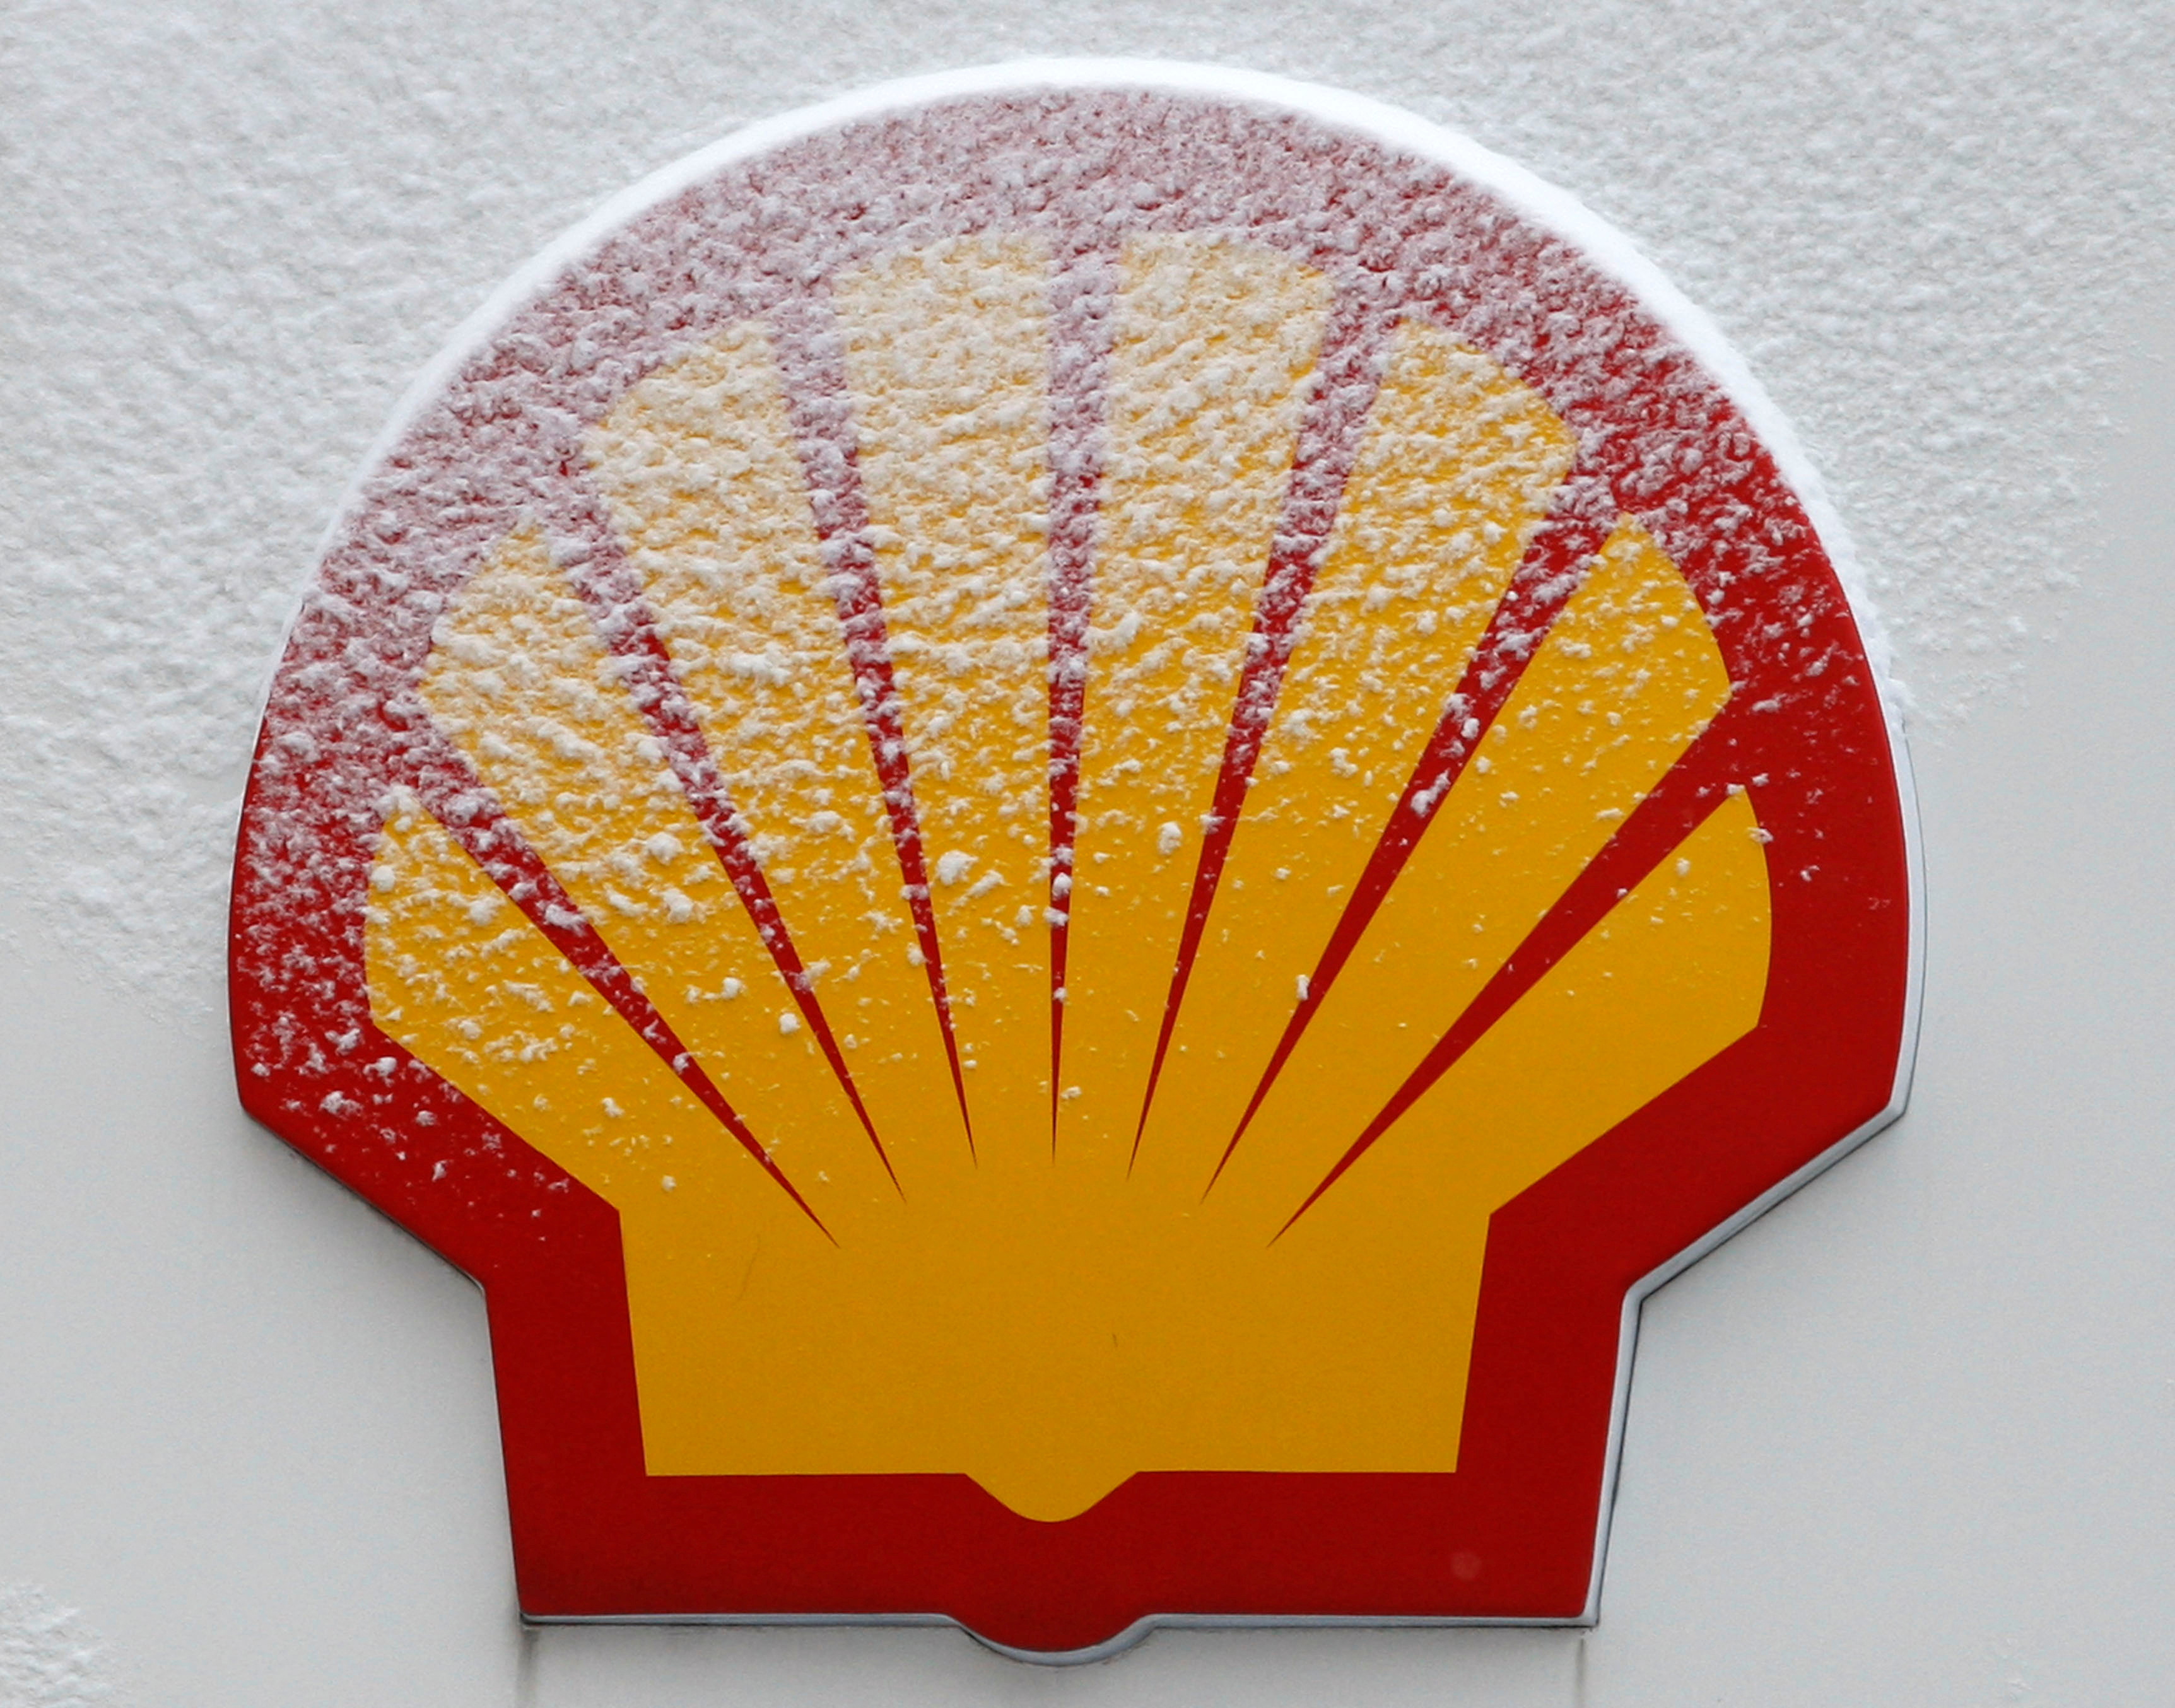 Snow covered Shell logo is seen at a petrol station in Istanbul